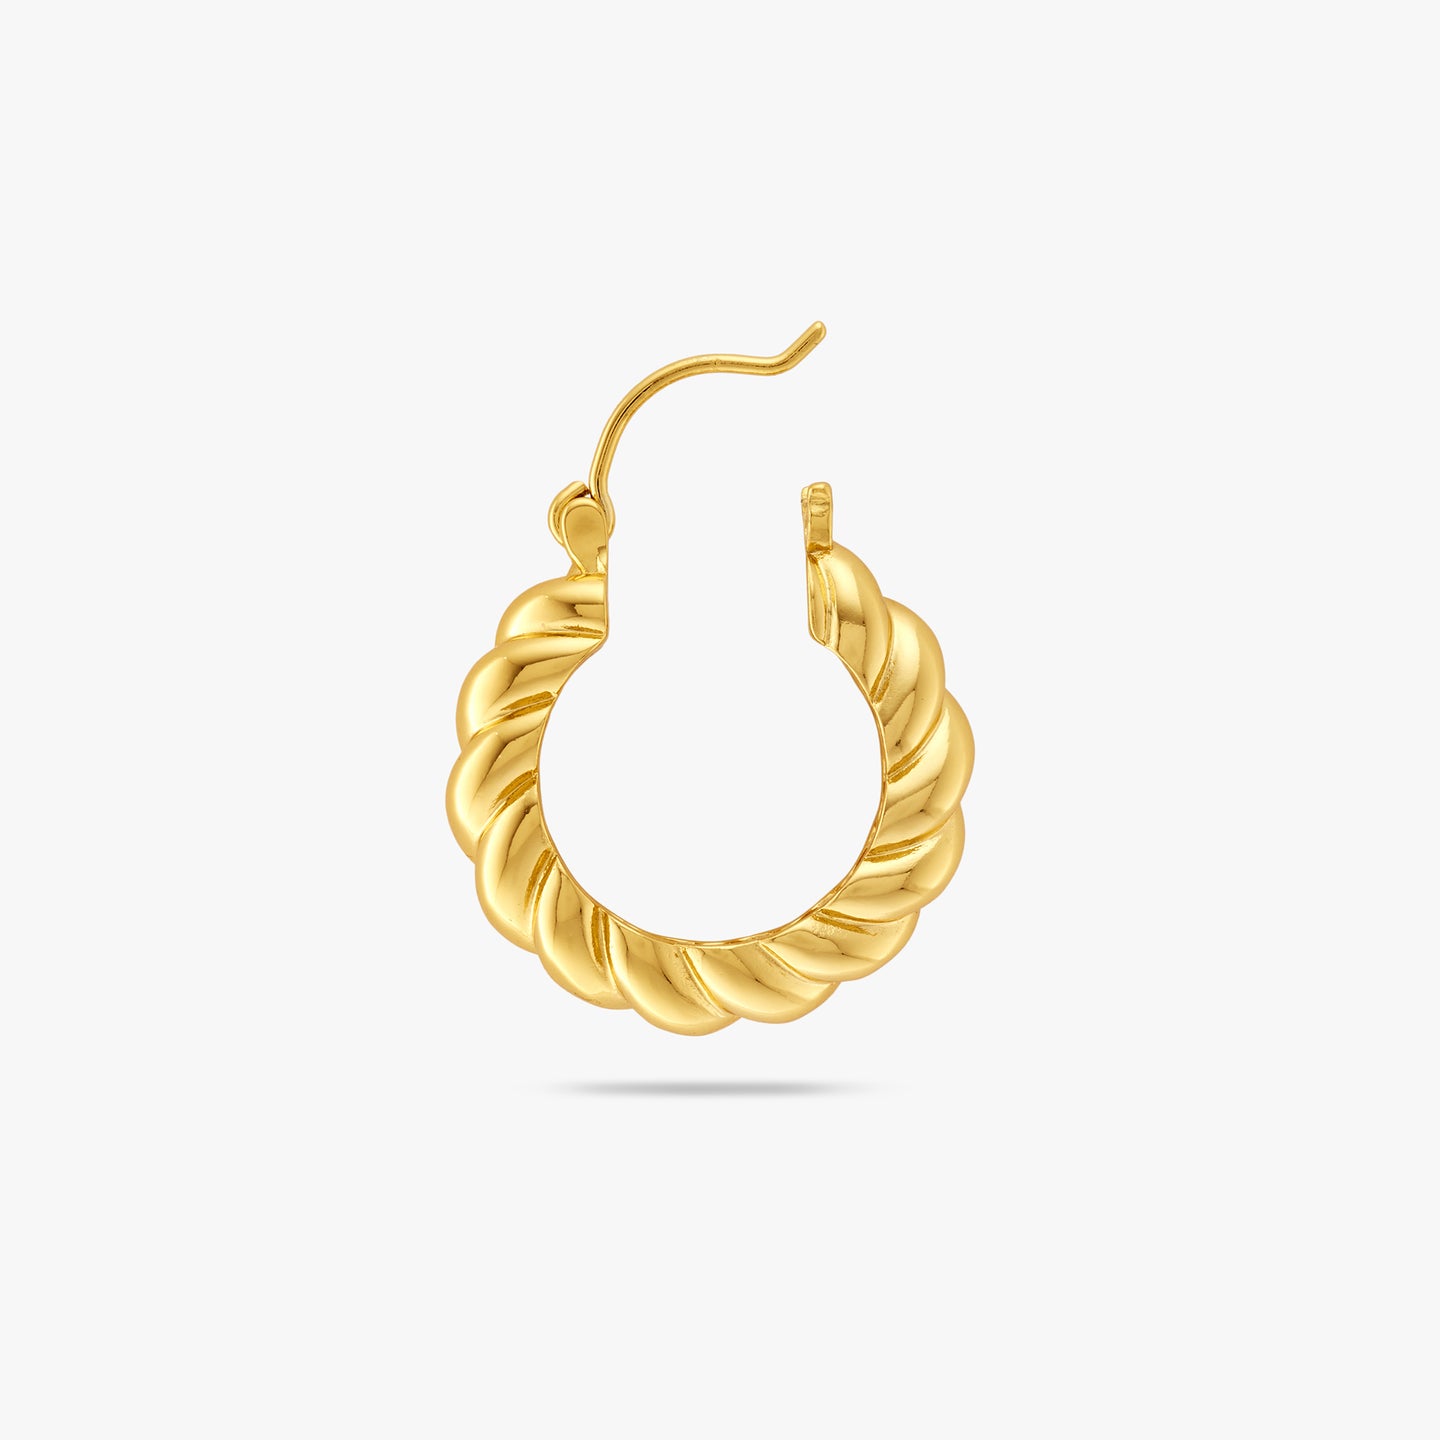 A medium sized gold hoop with french twist detailing and its clasp undone color:null|gold